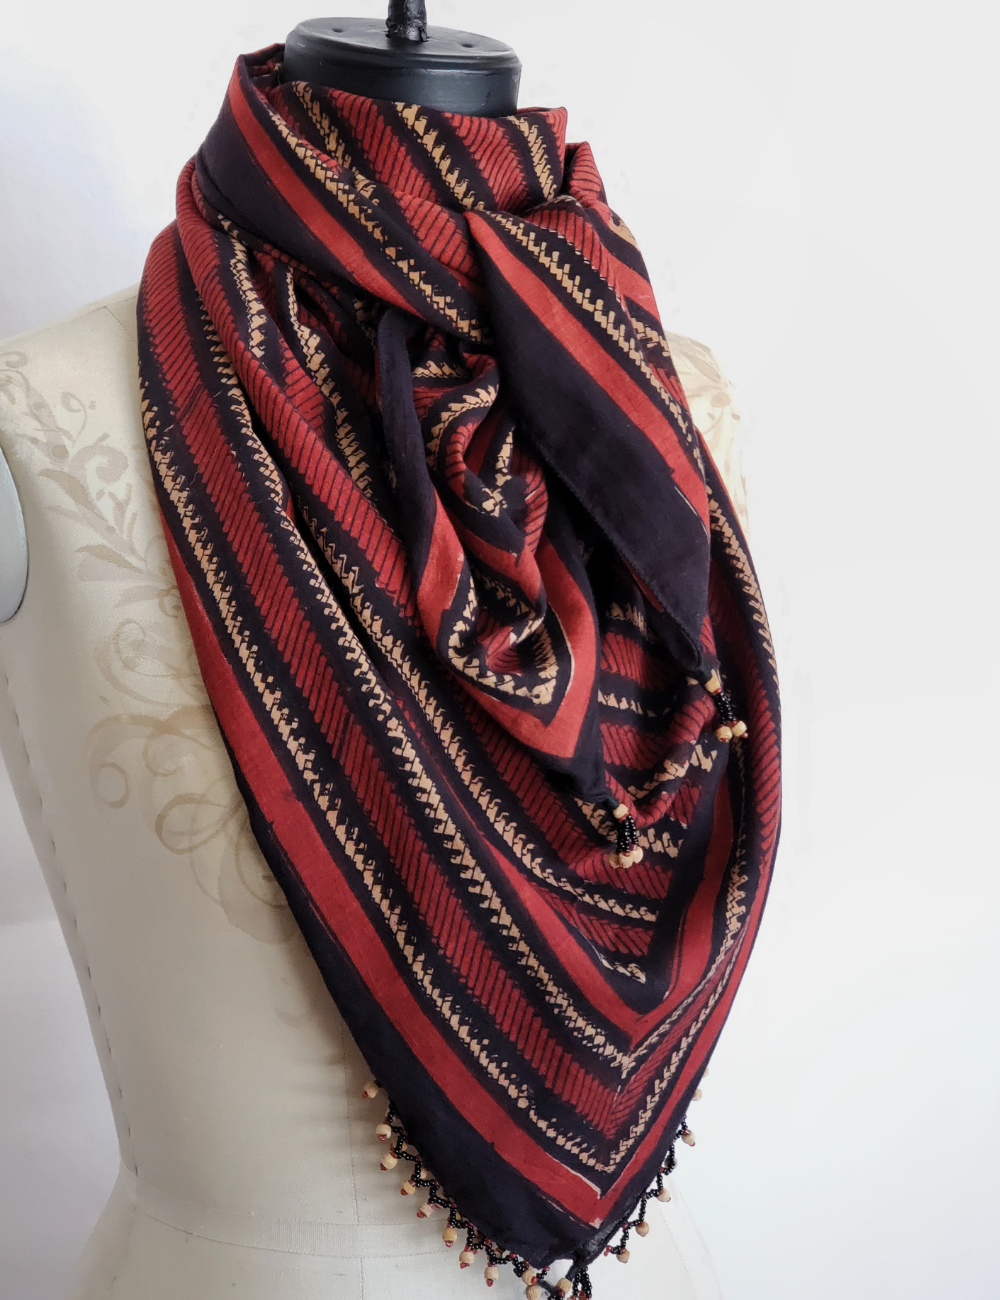 Long red and black borneo stripe scarf with wooden beads.